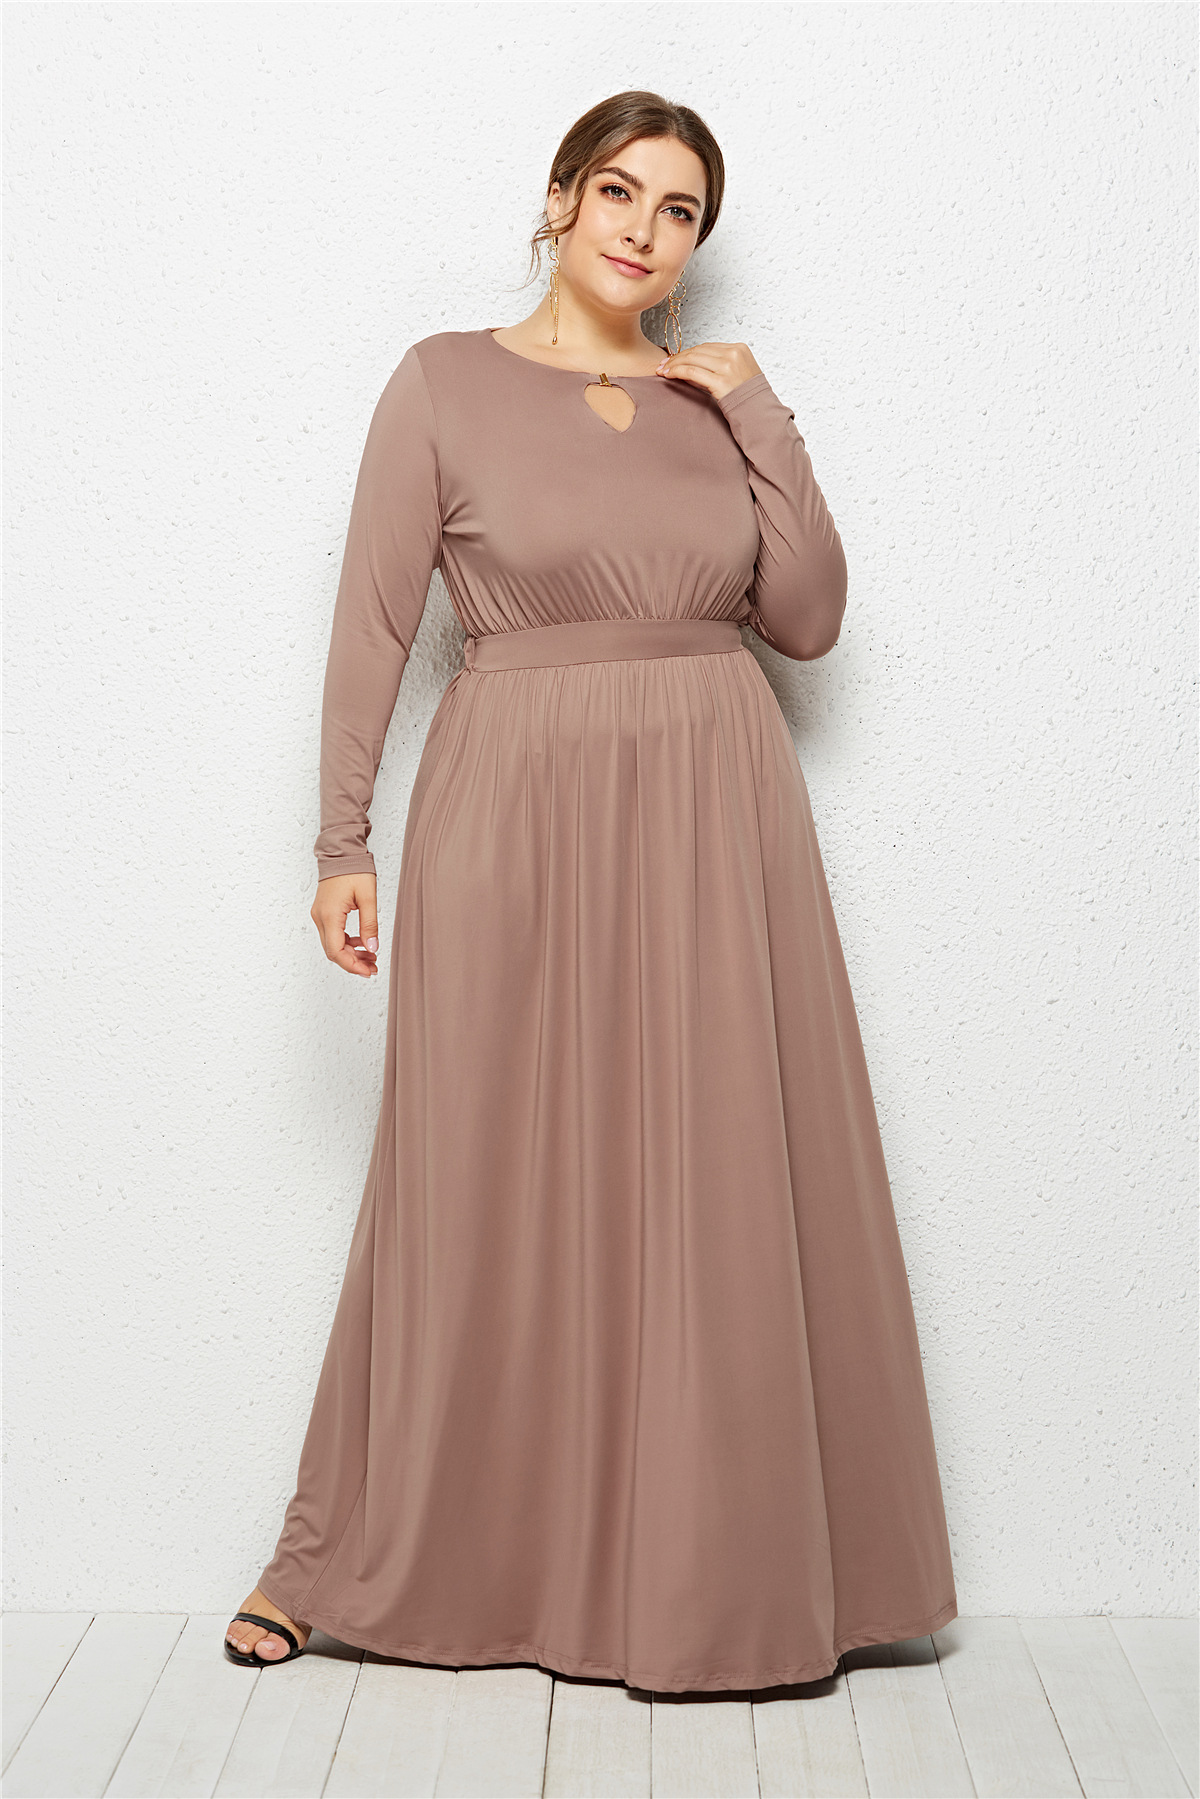 Plus Size Women Long Sleeve Maxi Cocktail Dresses Evening Party Formal